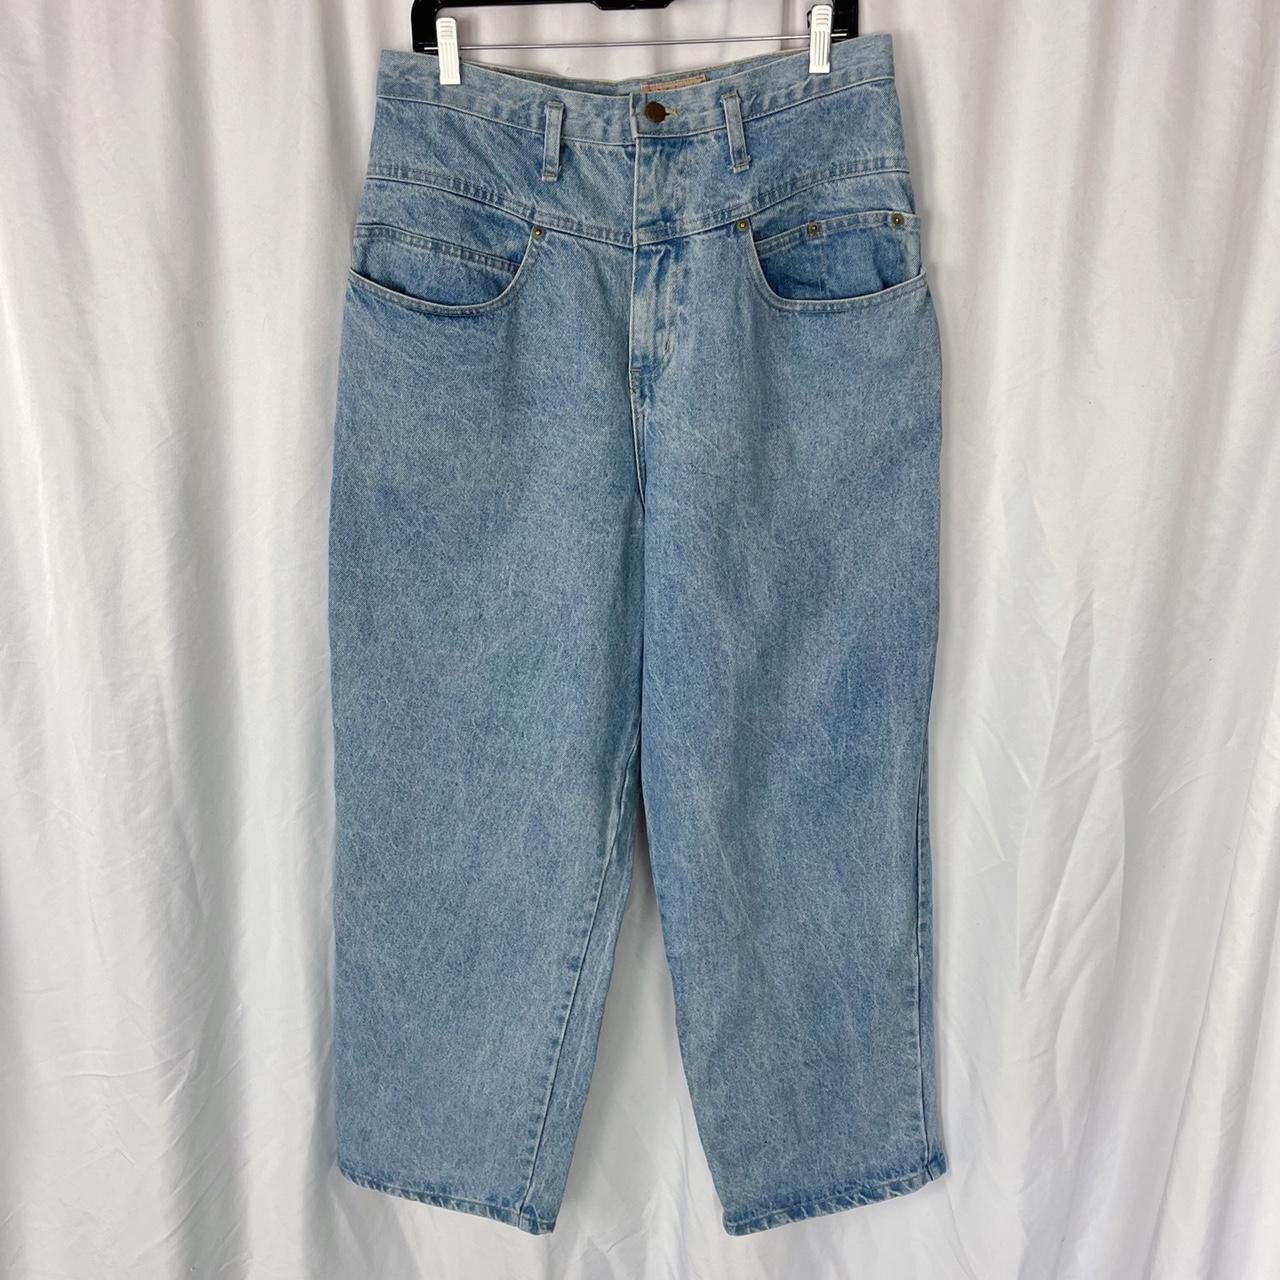 FREE US SHIP! 1980s Vintage High Waisted Baggy Fit - Depop